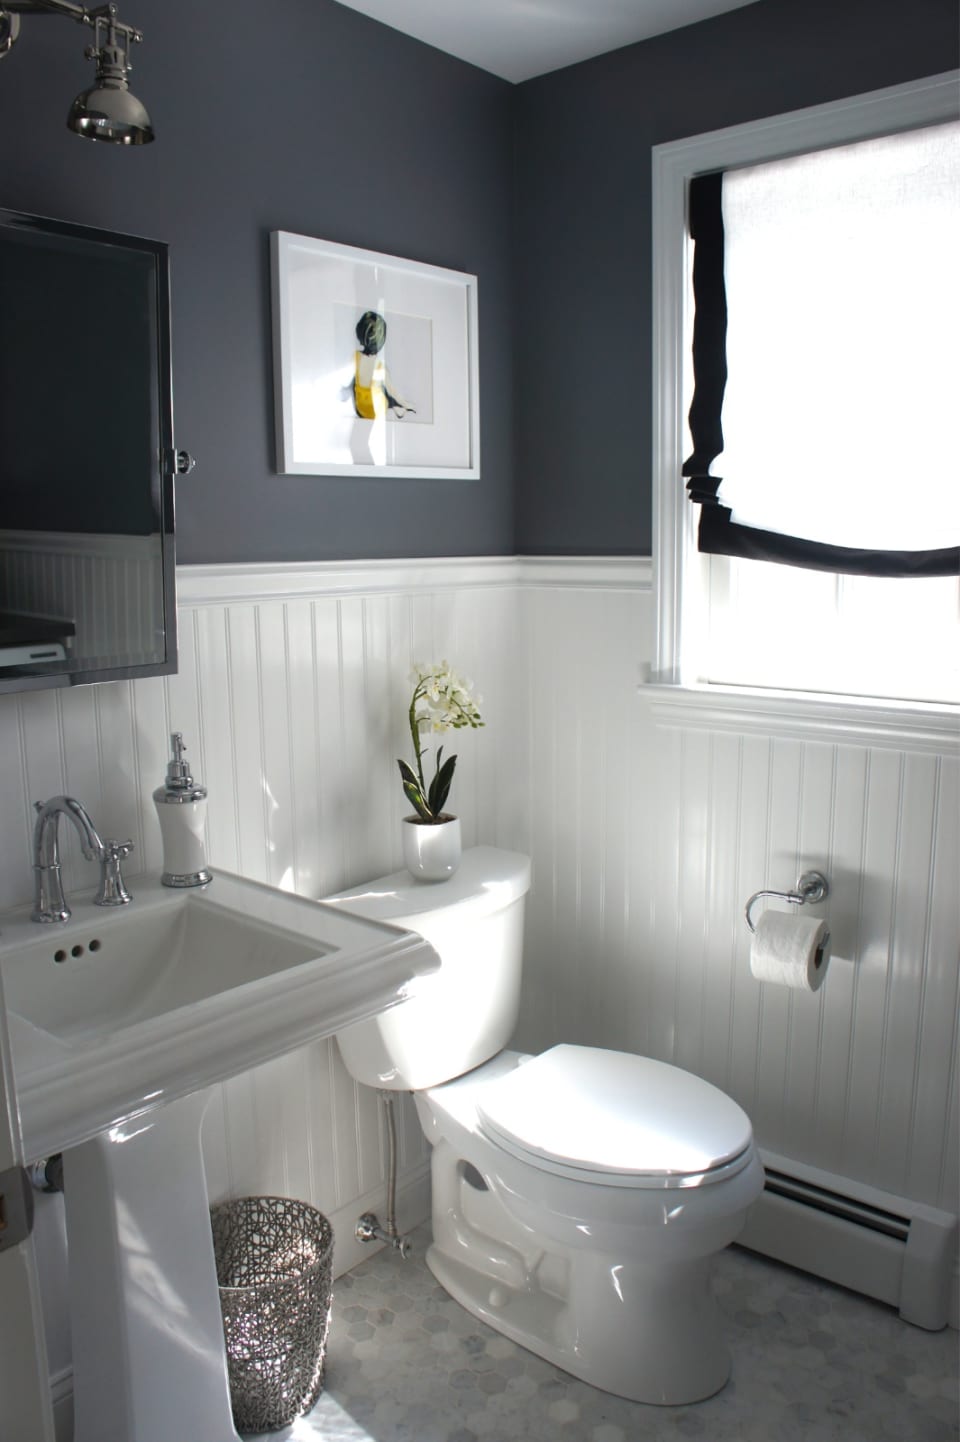 Bathroom wainscoting – what it is and how to use